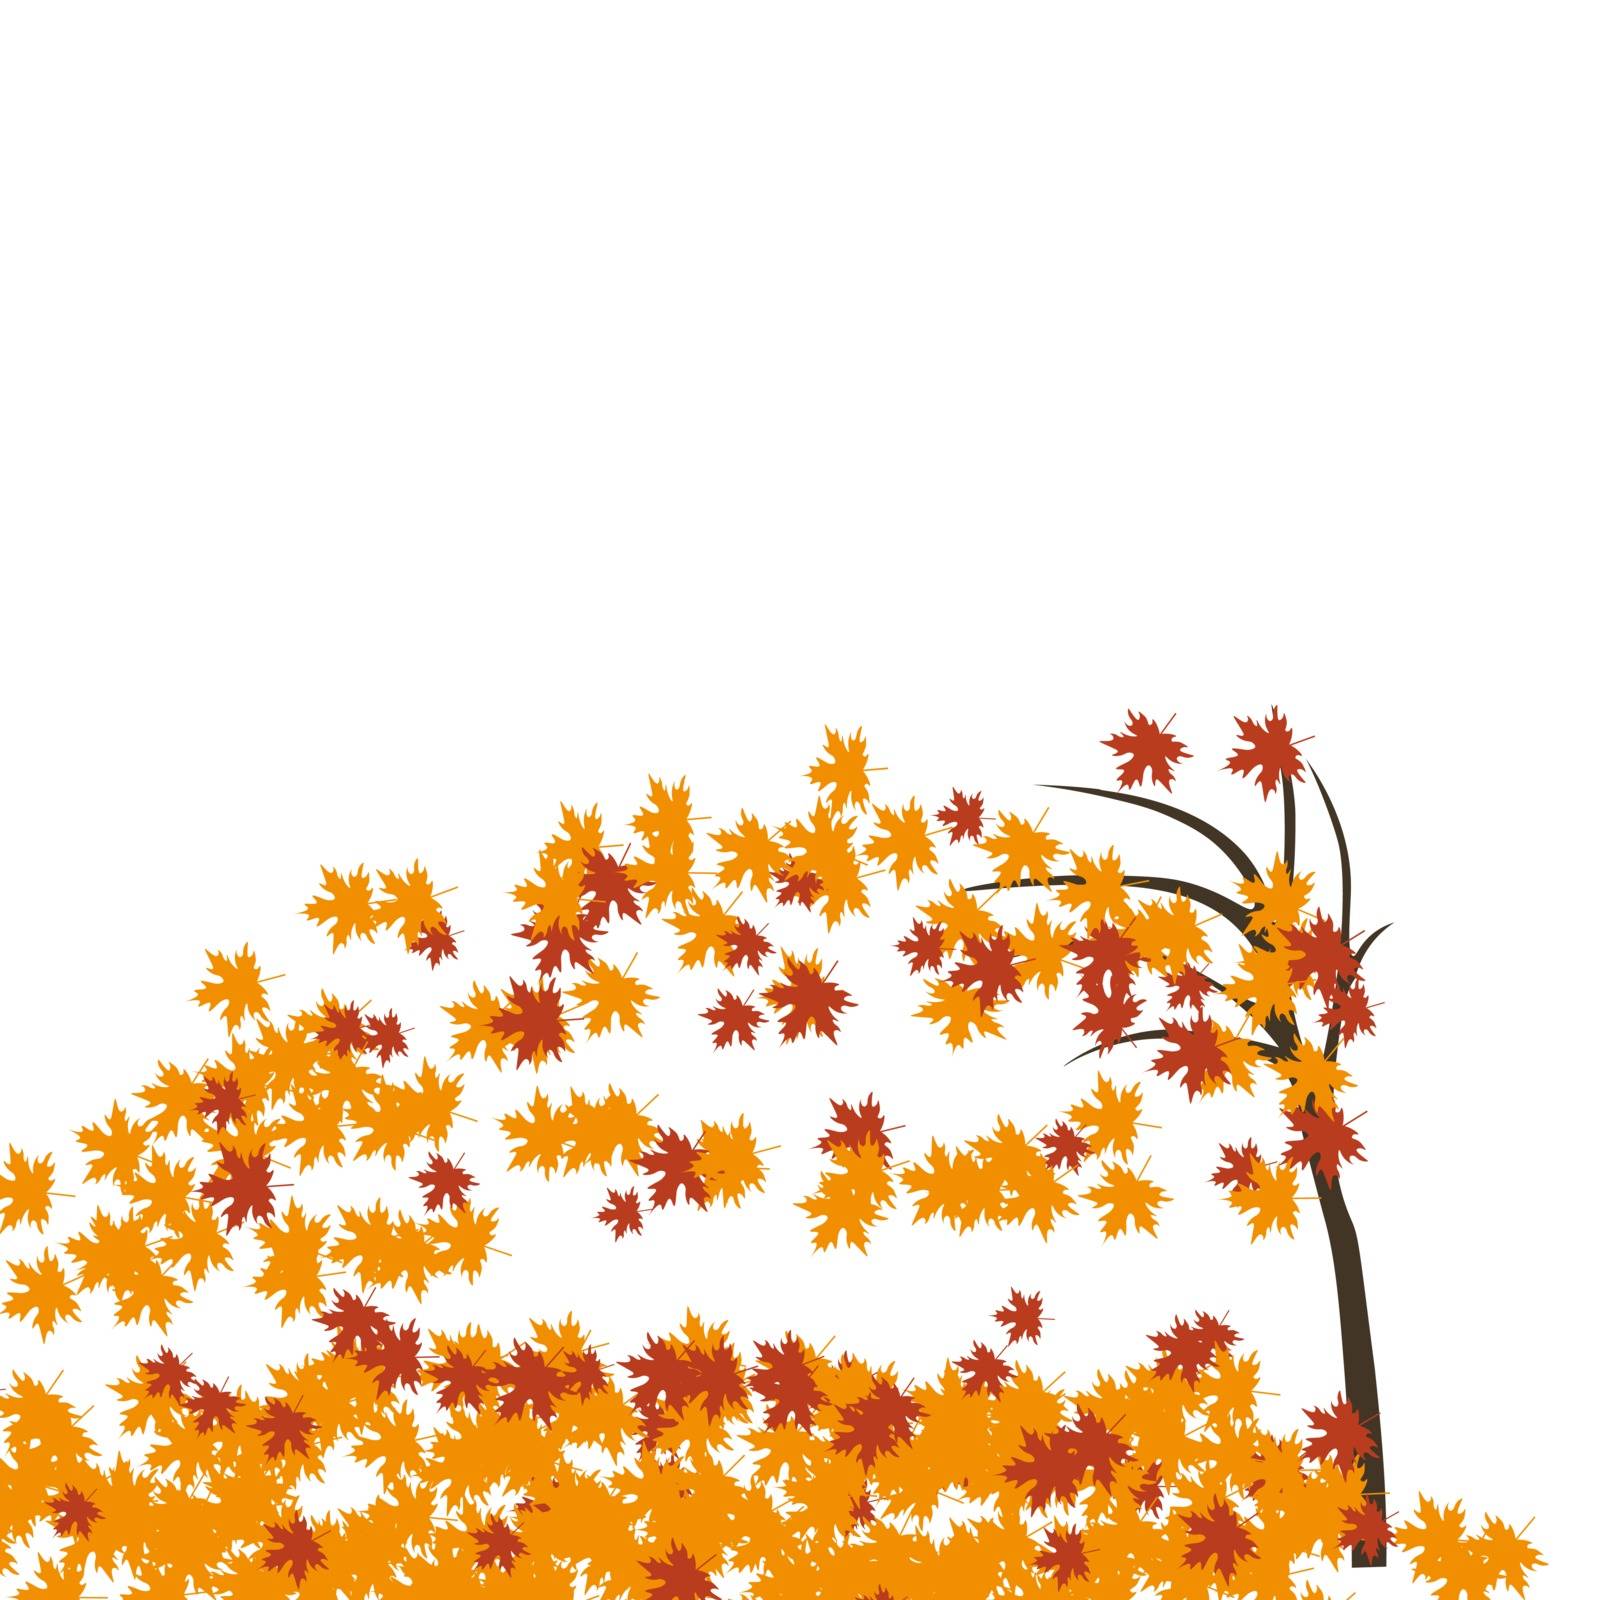 Maple tree in the wind, autumn. Fallen red and yellow leaves. Vector illustration